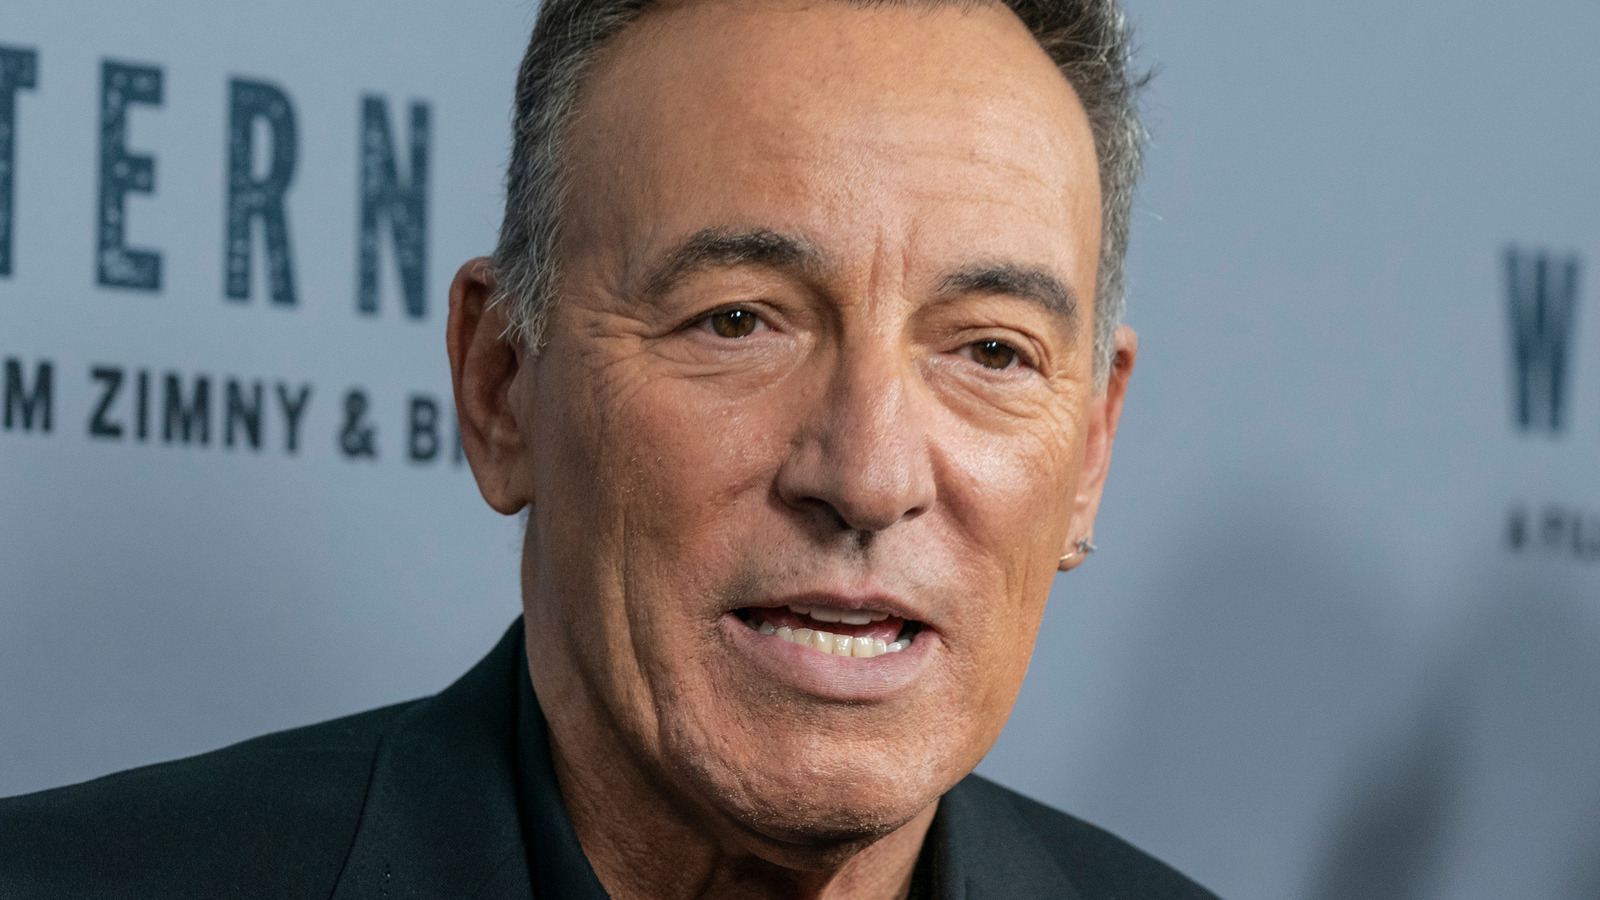 Is Bruce Springsteen A Grandfather